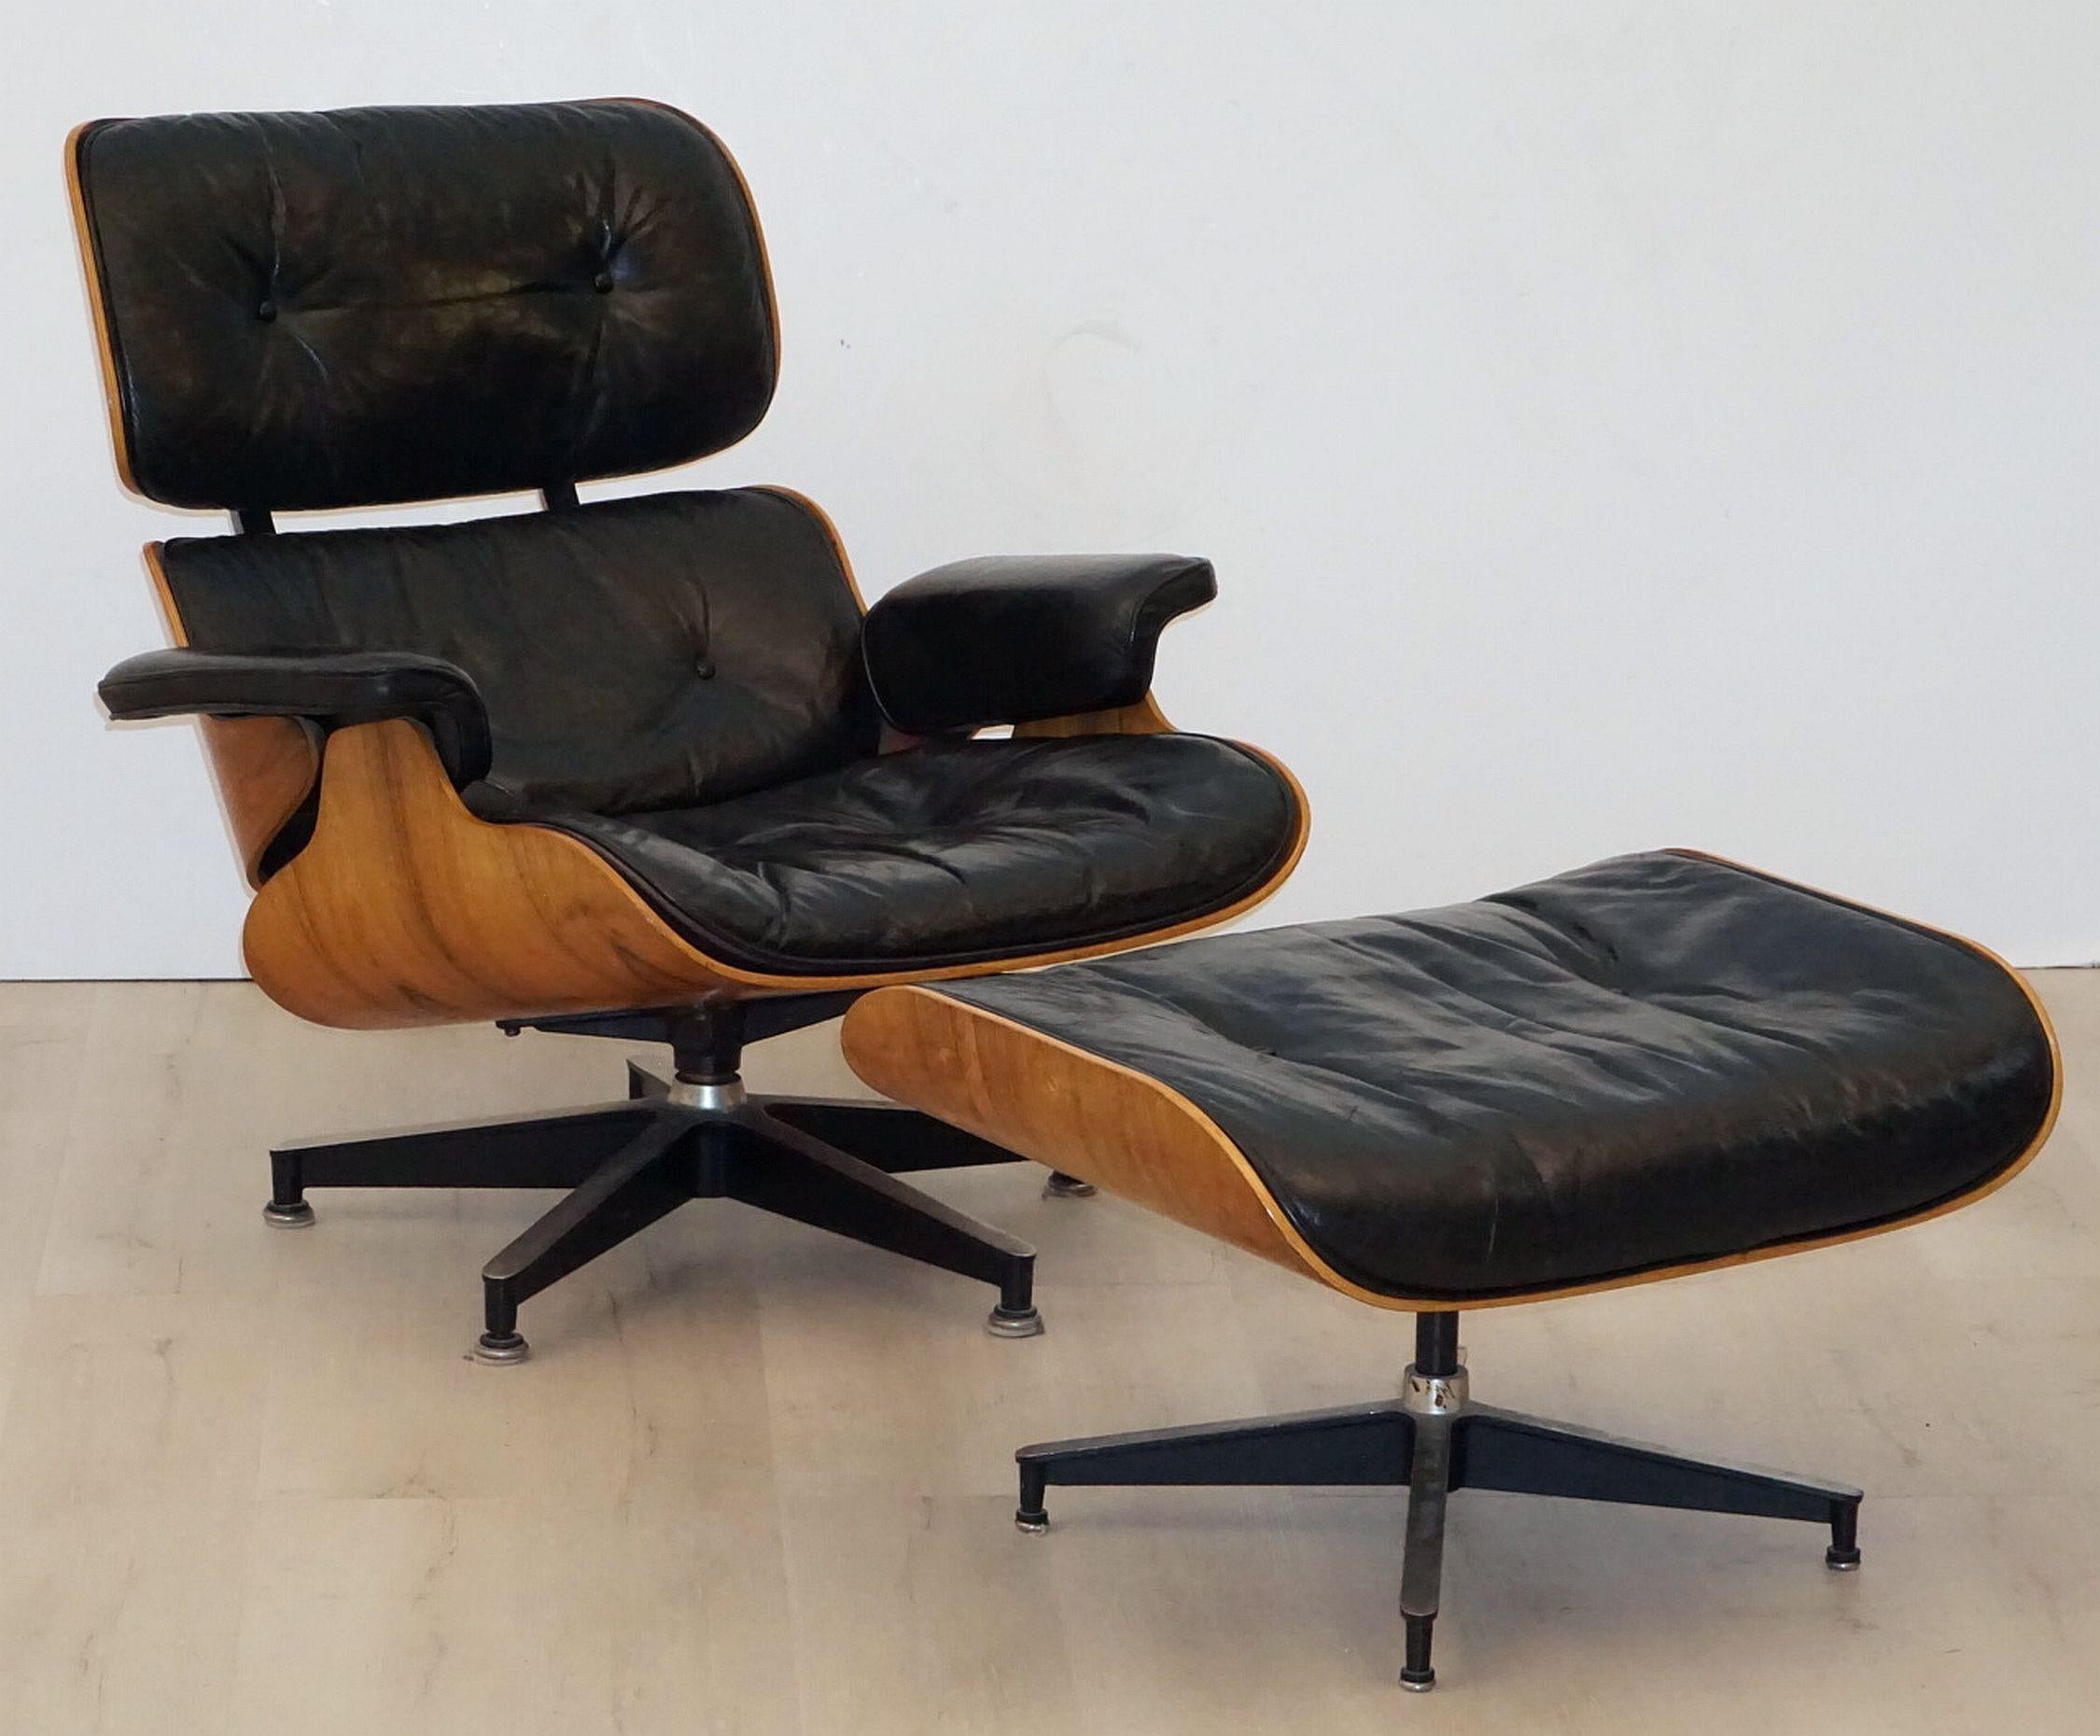 A fine early production Eames lounge chair with ottoman by Herman Miller, circa 1965, with original tufted black leather upholstered cushions. 
The Brazilian rosewood (Rio Palissander) has a beautiful wood grain and is in excellent vintage